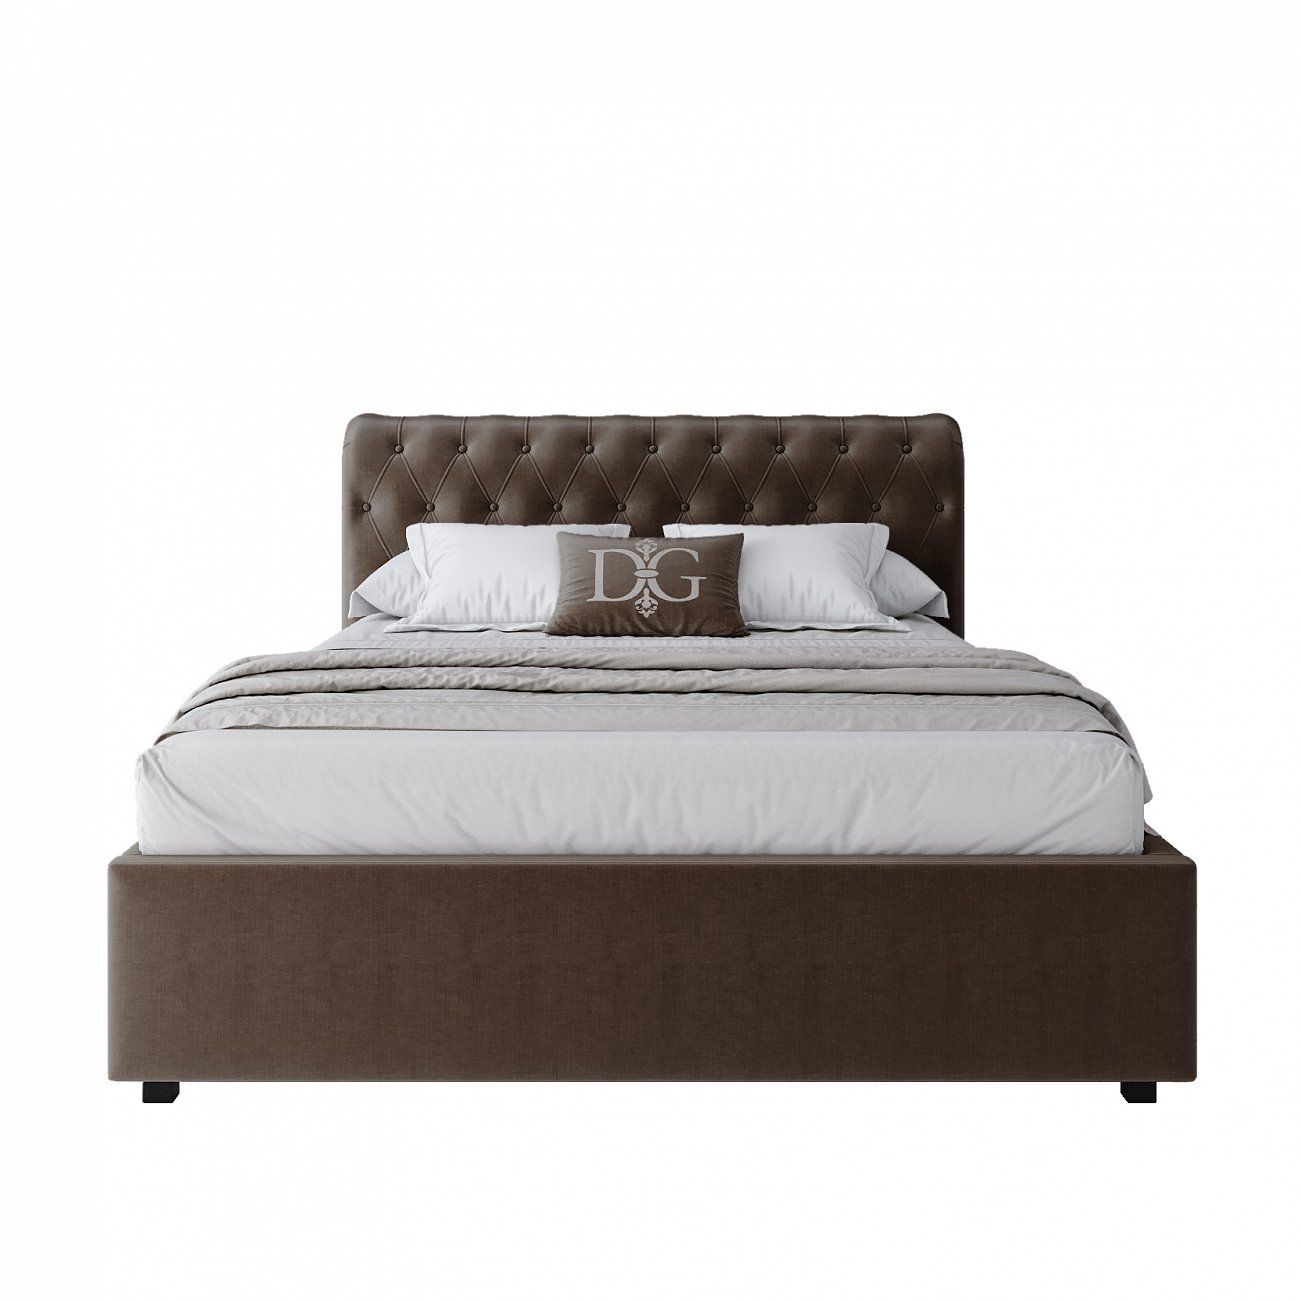 Teenage bed with carriage screed 140x200 brown Sweet Dreams